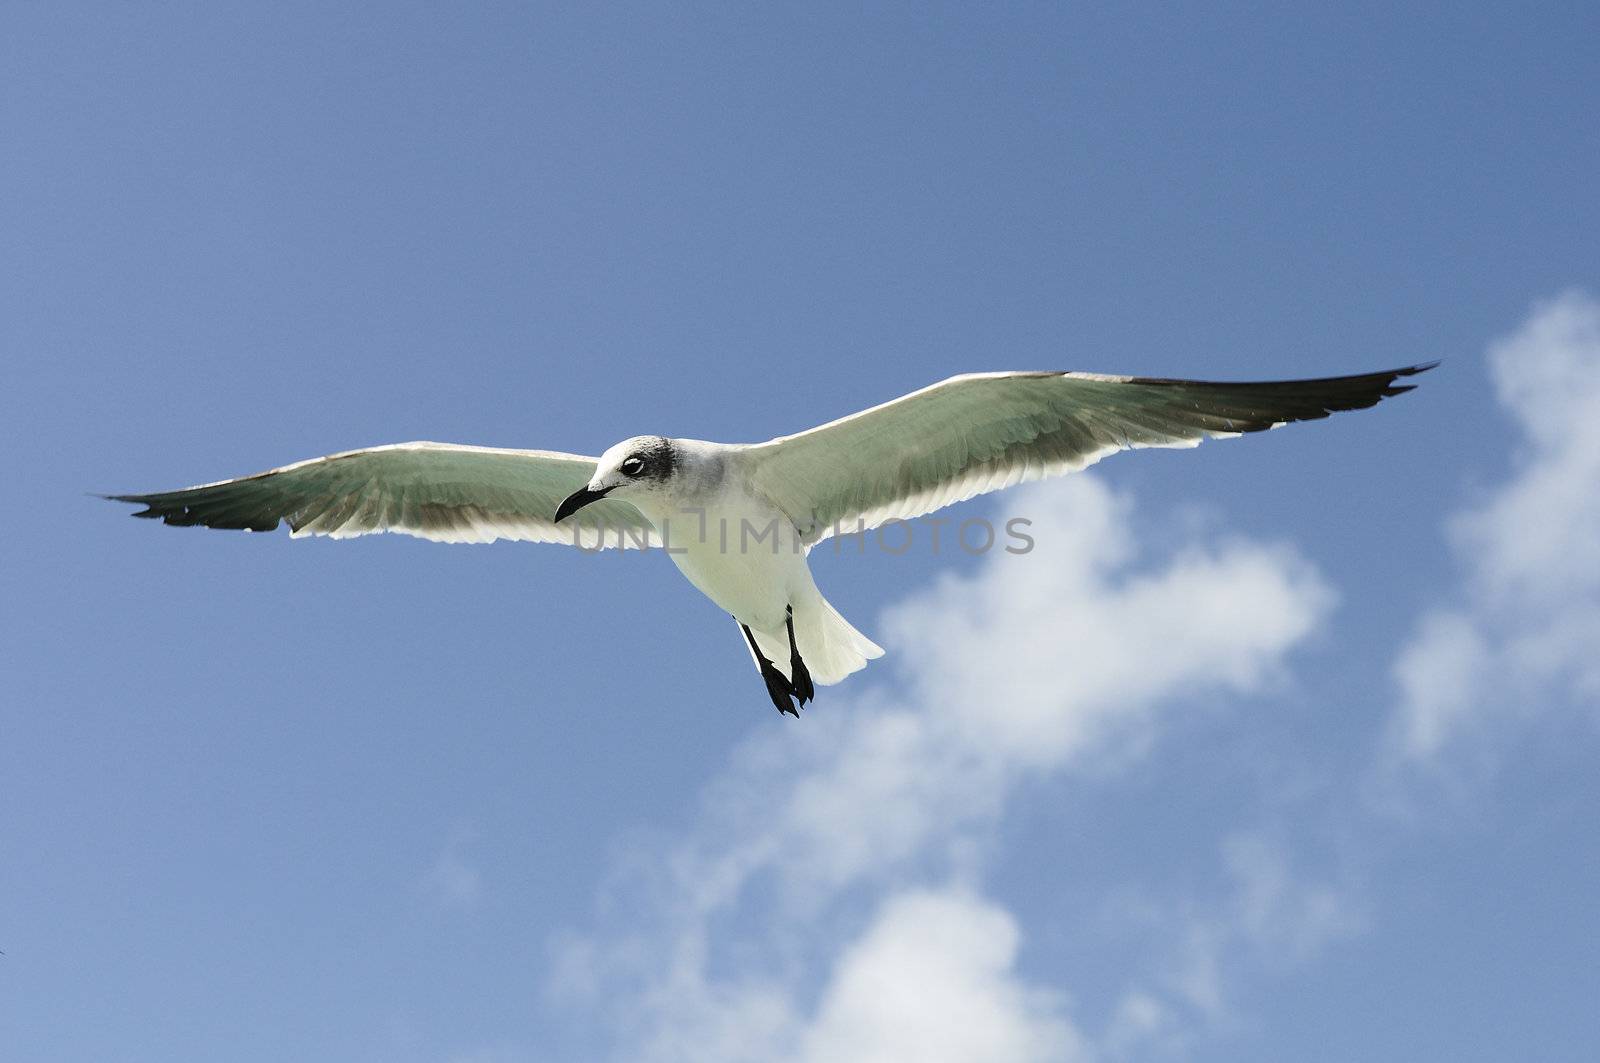 A beautiful seagull by ventdusud